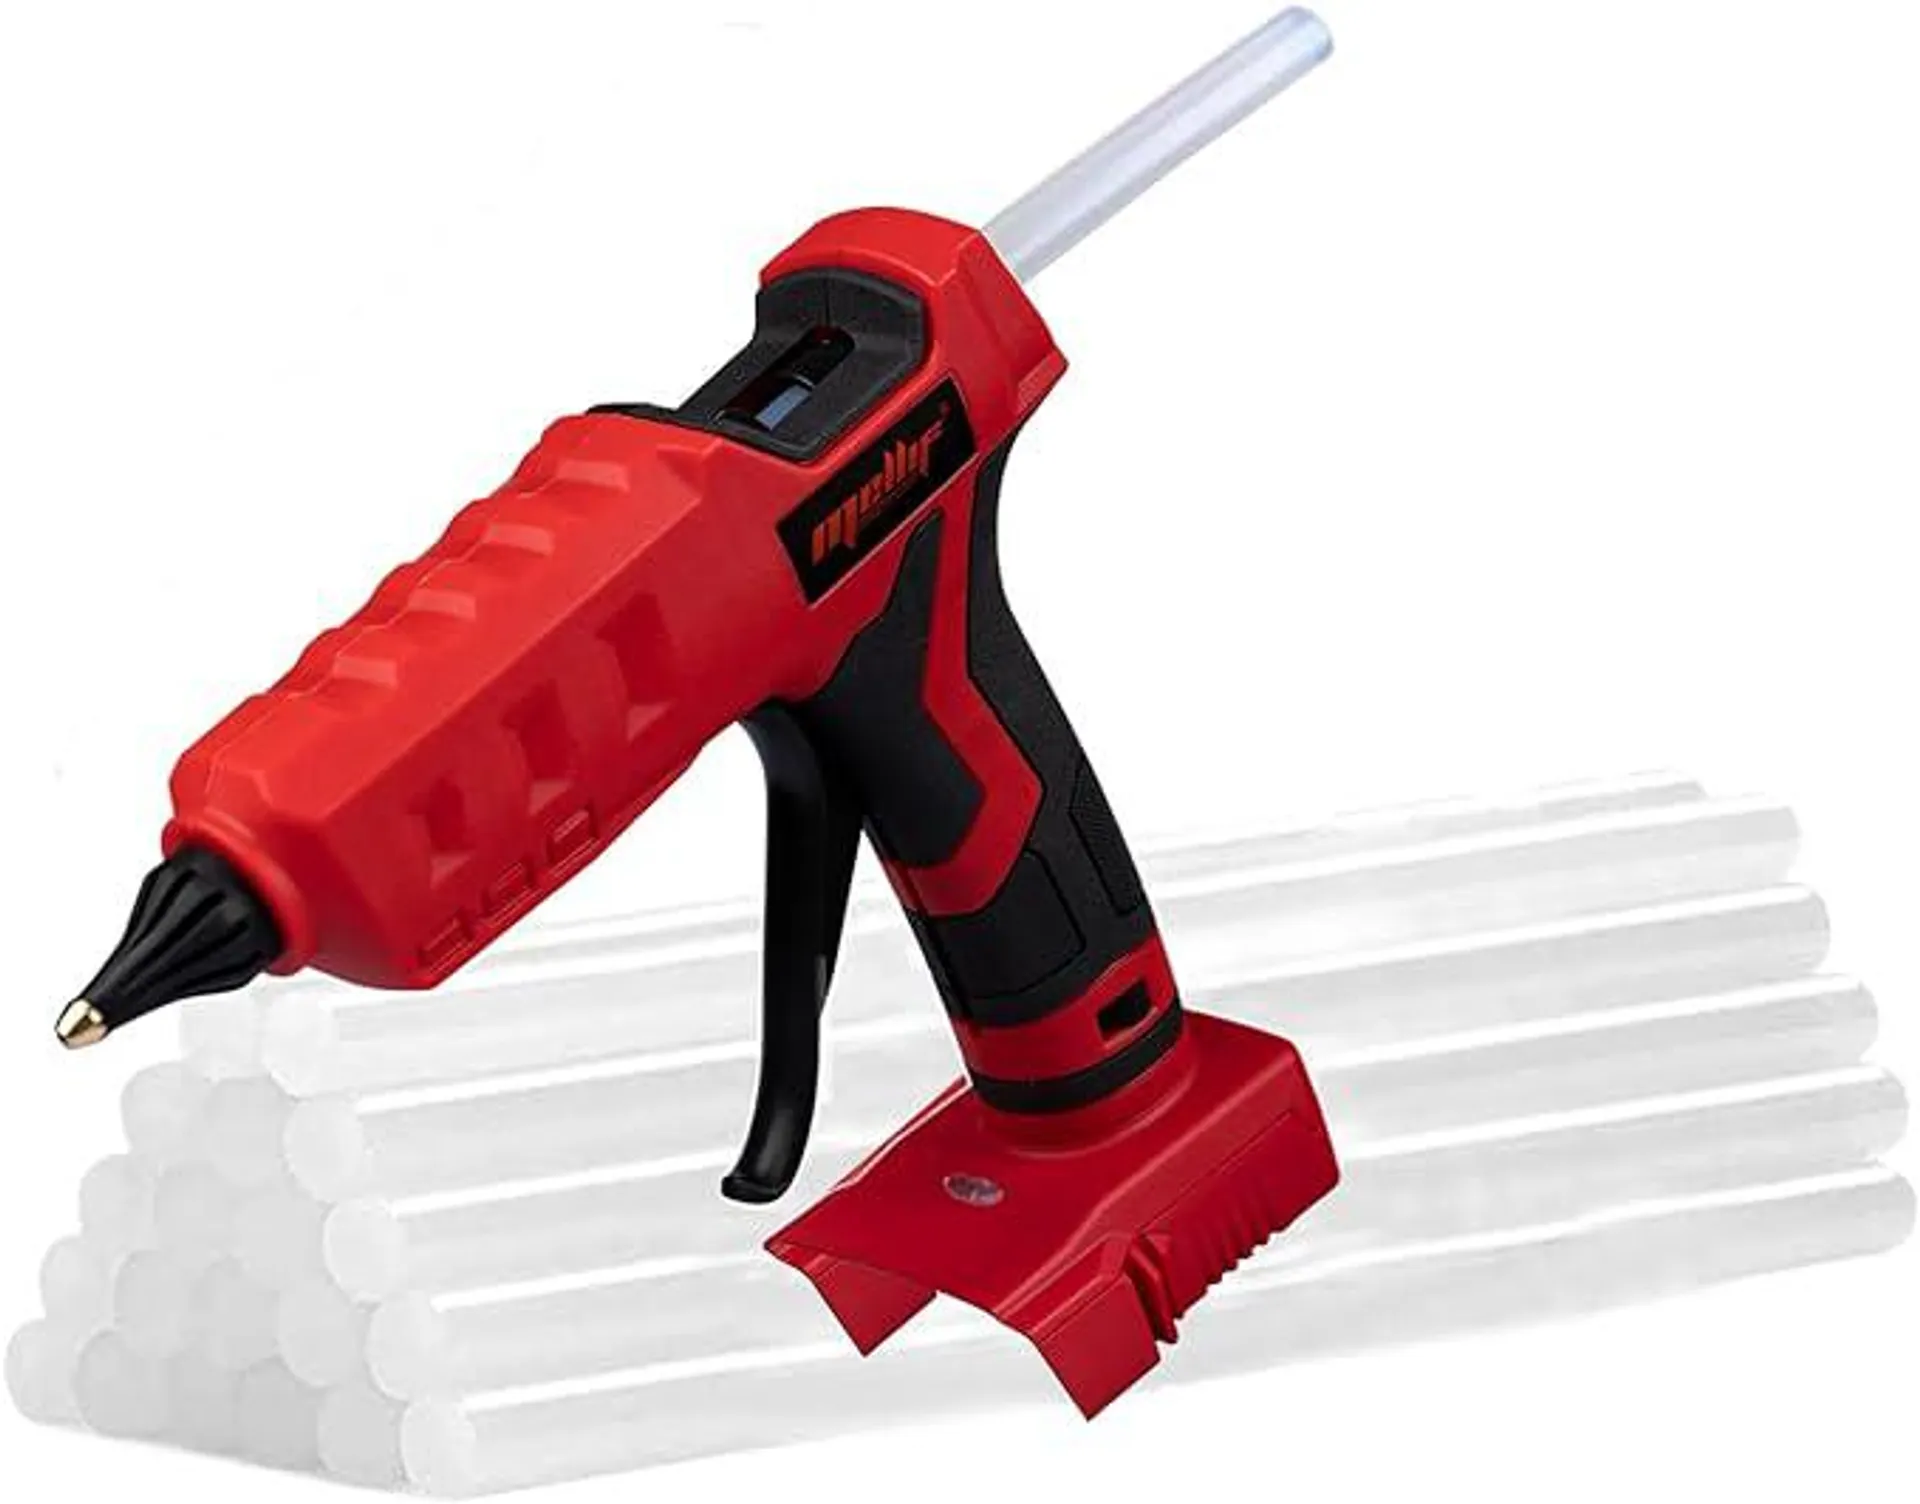 Mellif Cordless Hot Glue Gun for Milwaukee 18V Battery, Handheld Electric Power Glue Gun Full Size for Arts & Crafts & DIY with 20 0.43" Glue Sticks (Battery Not Included)